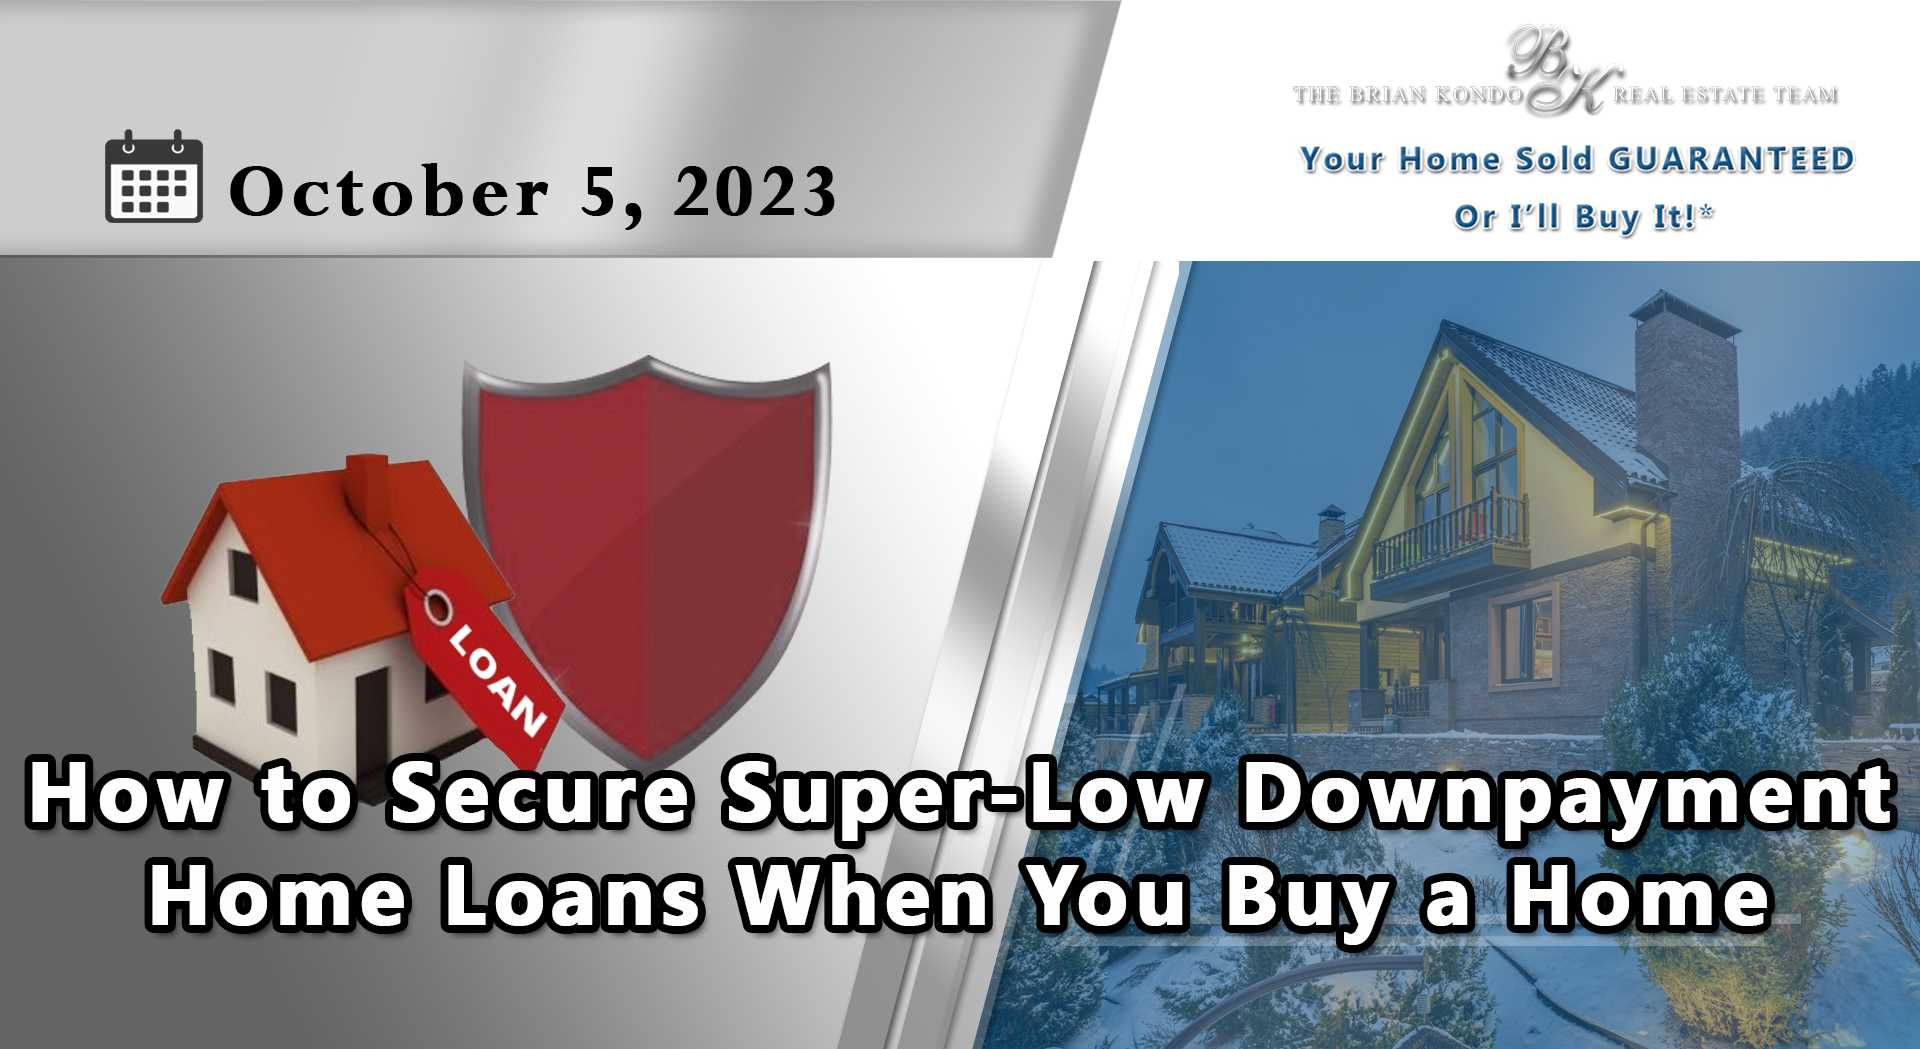 How to Secure Super-Low Downpayment Home Loans When You Buy a Home